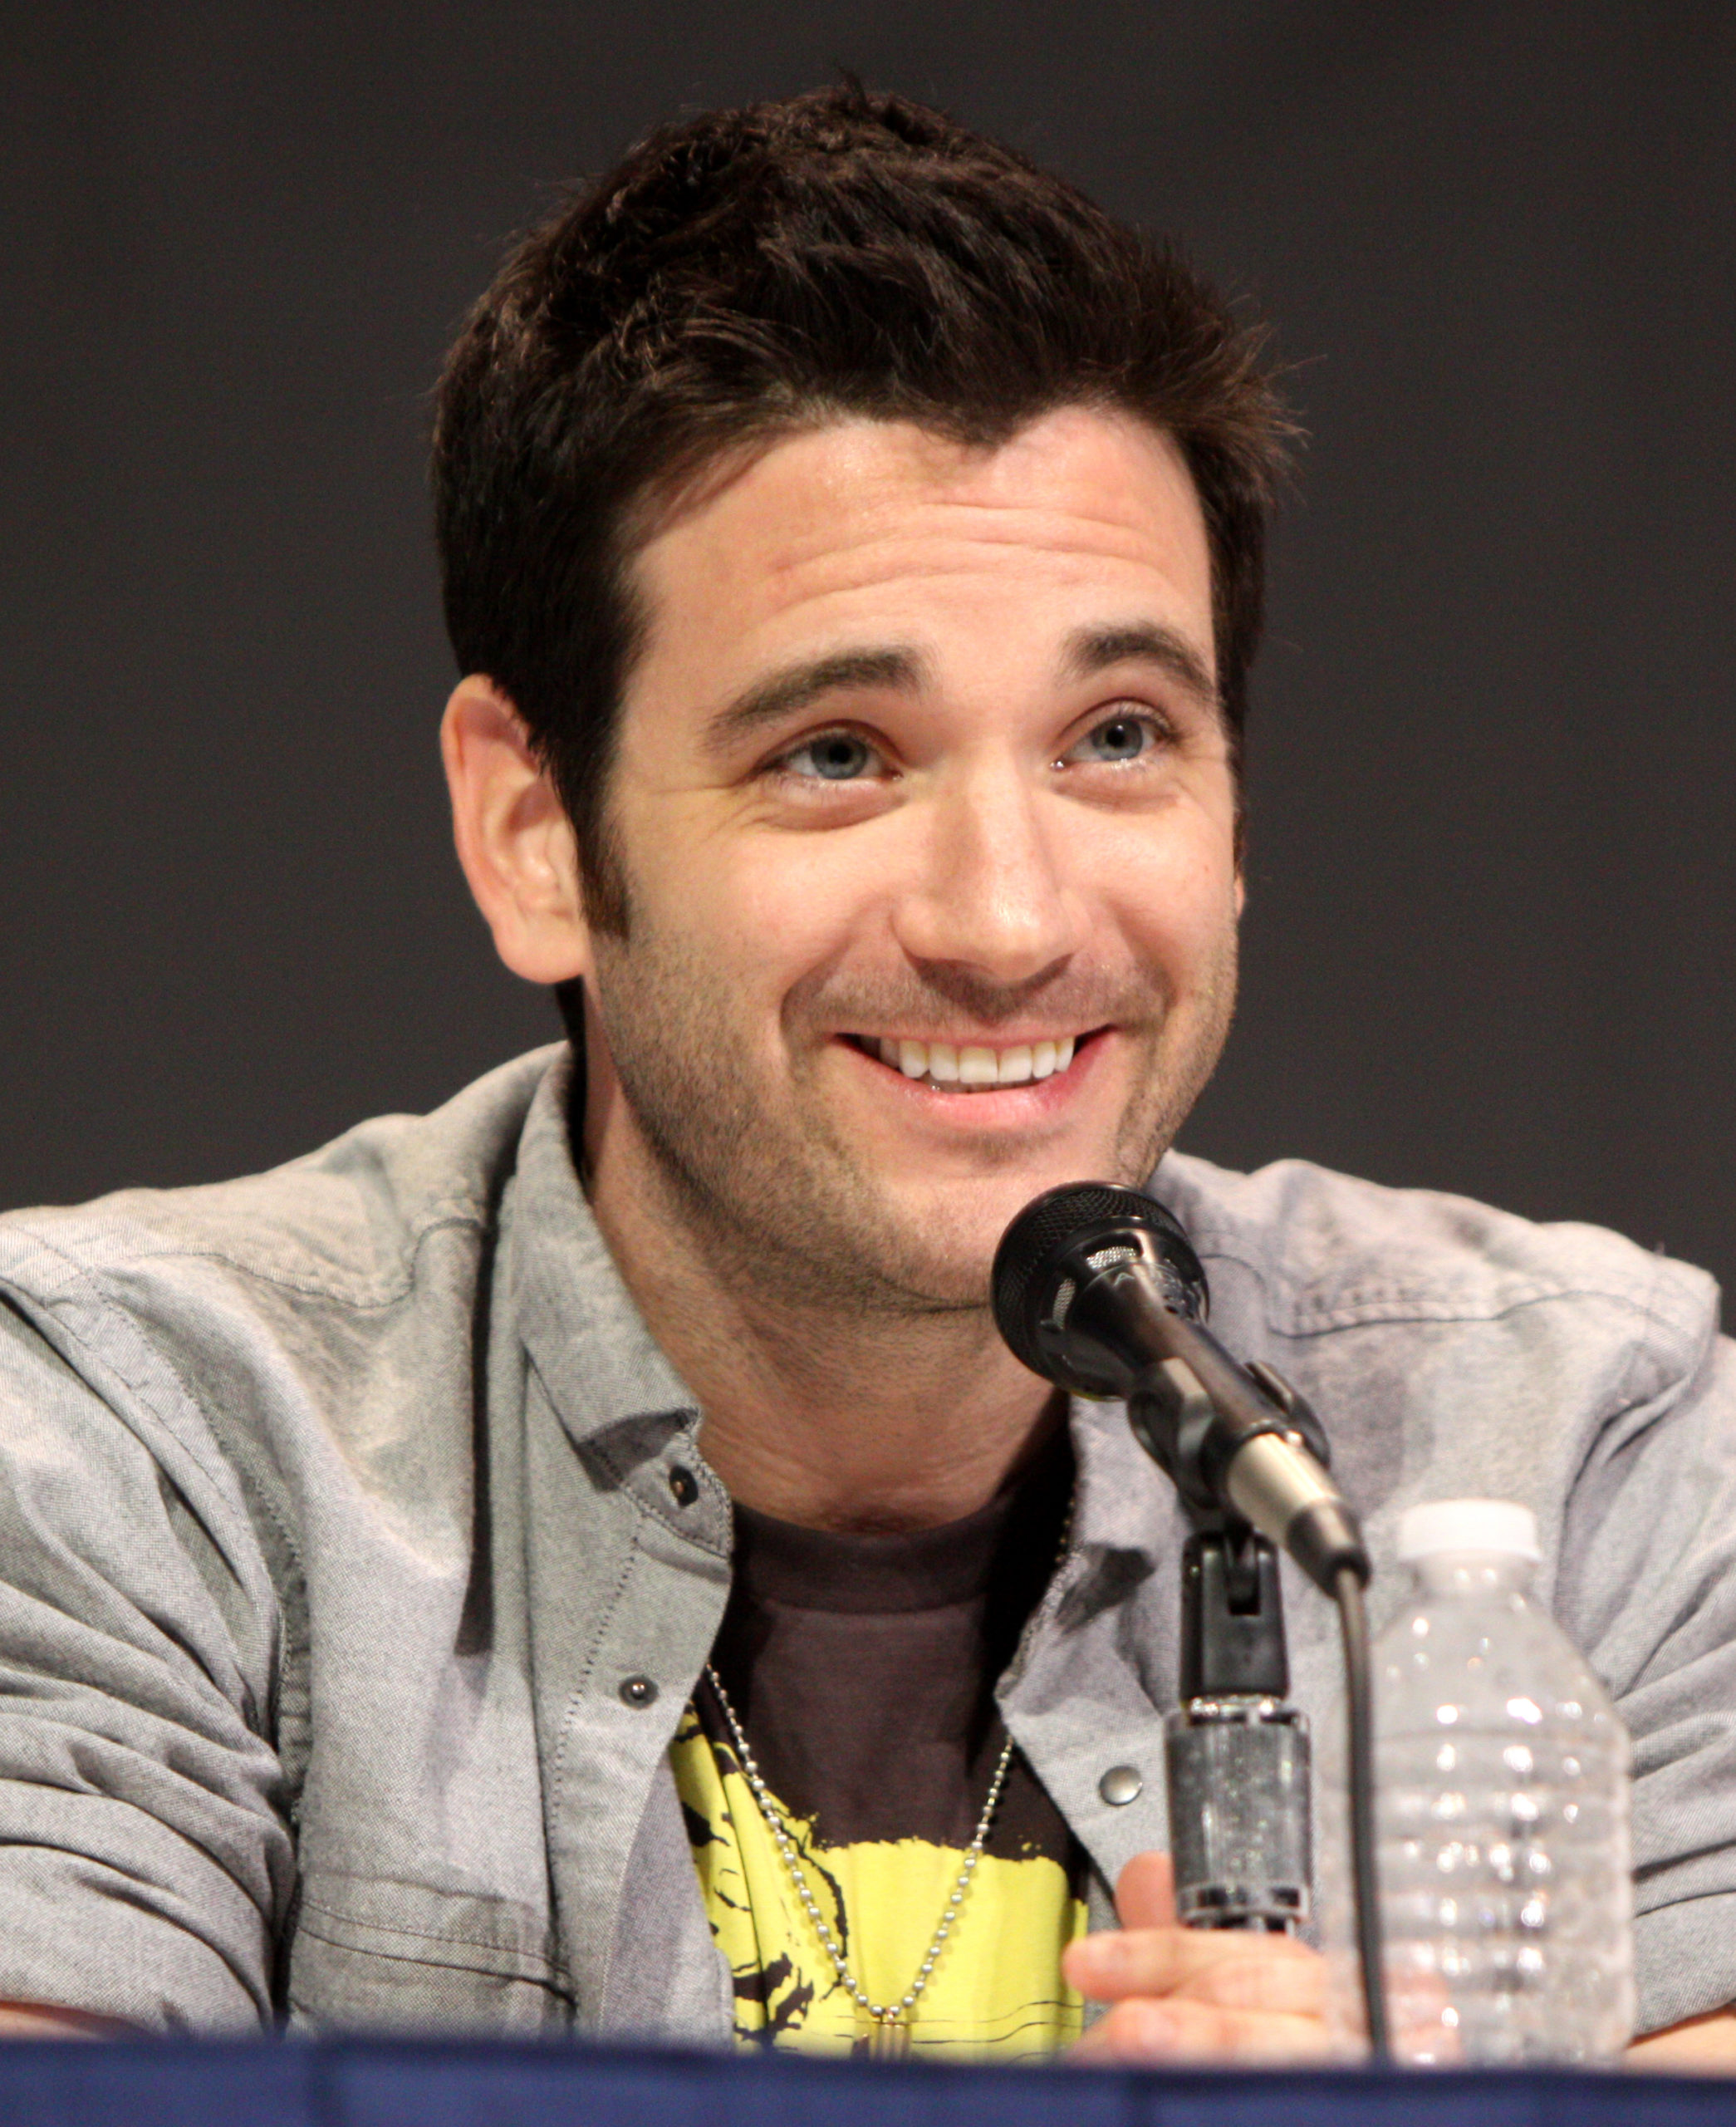 Chicago Med alum Colin Donnell Lands Major TV Show Role 2 Years After His Exit